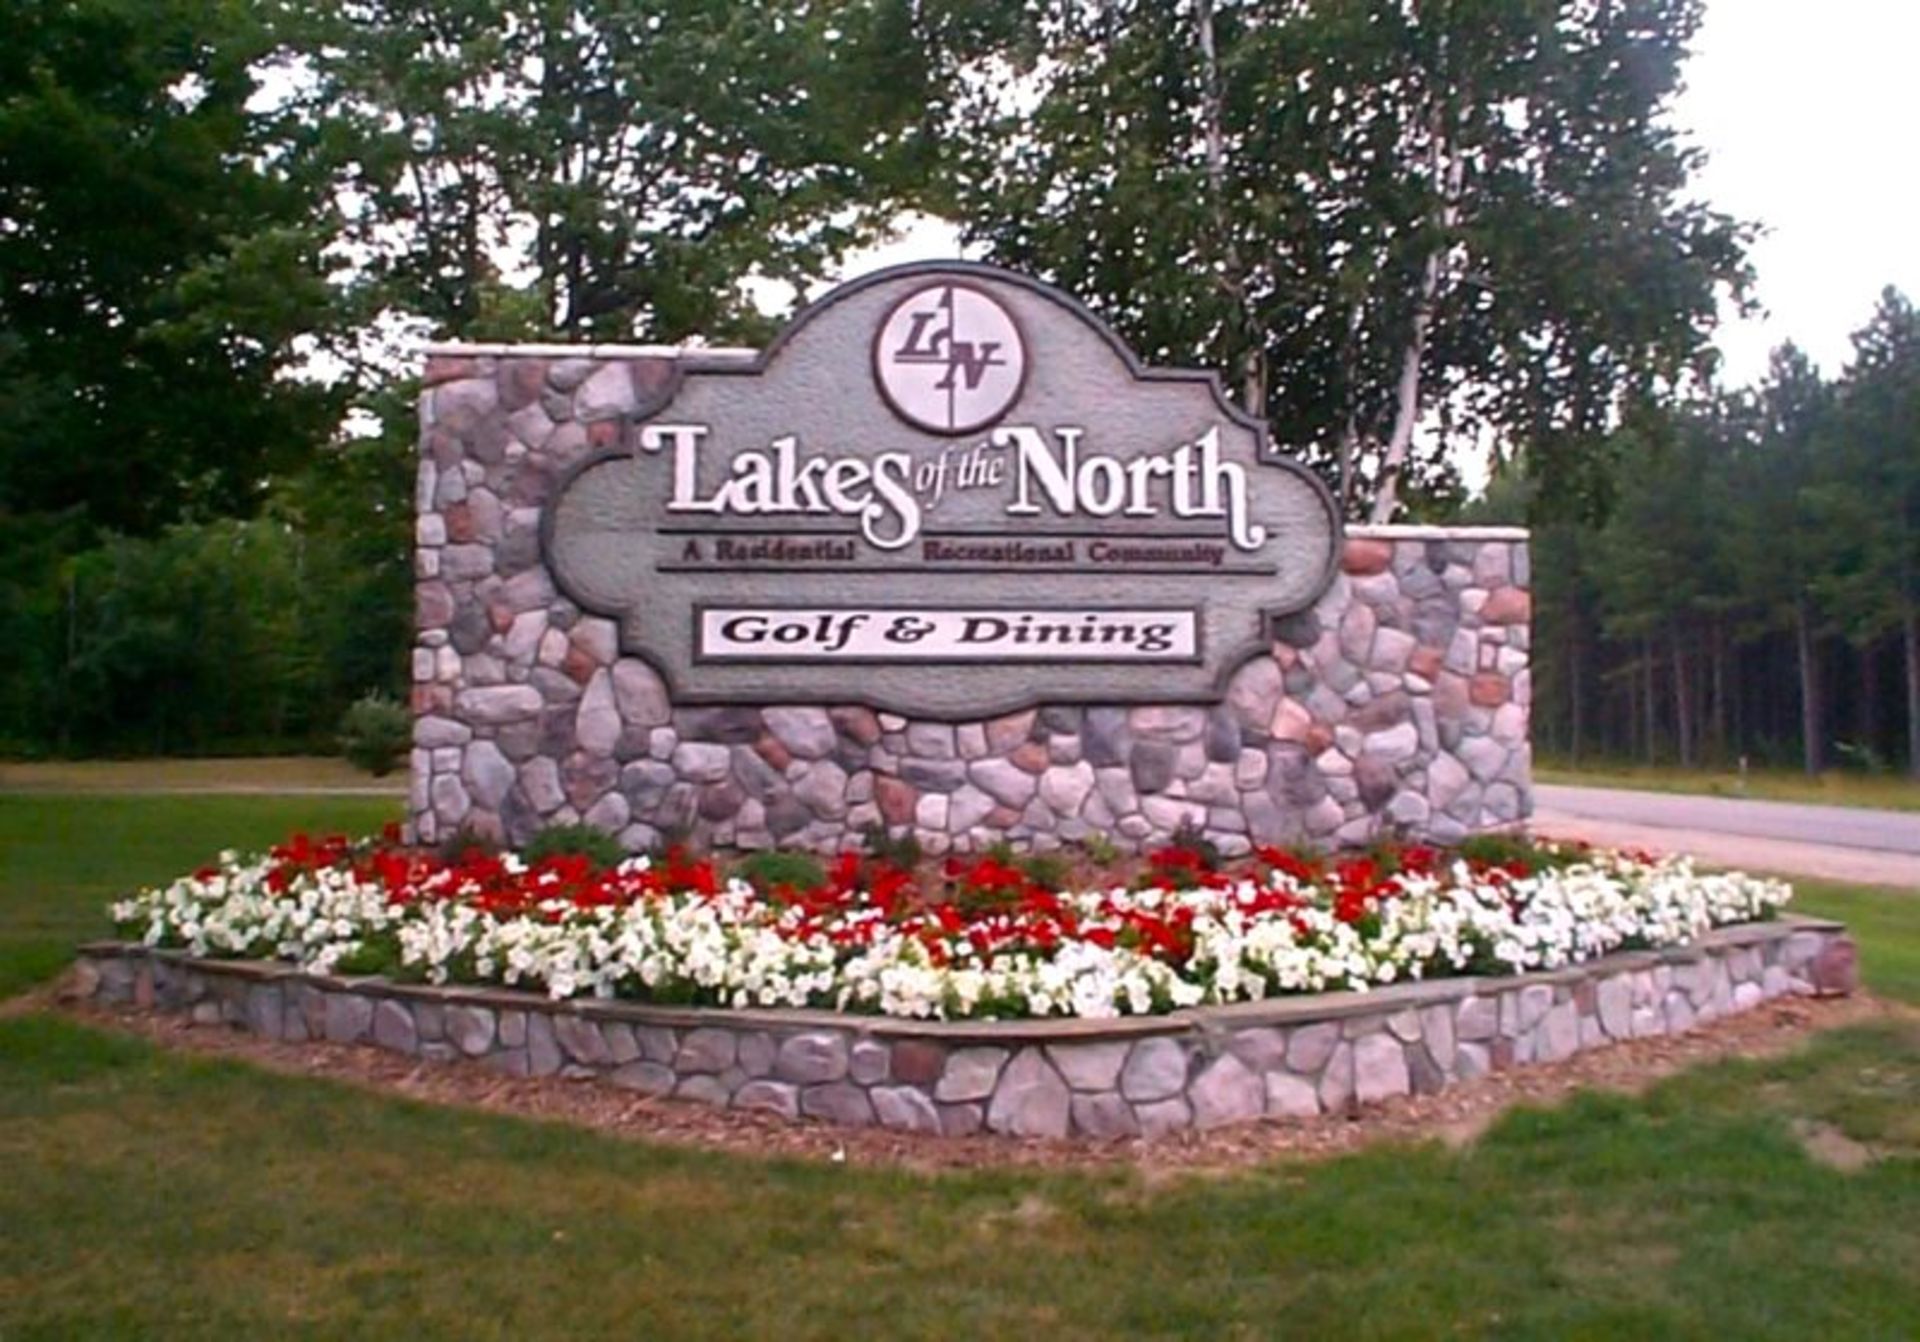 Build in Michigan's Lakes of the North Community! - Image 10 of 11